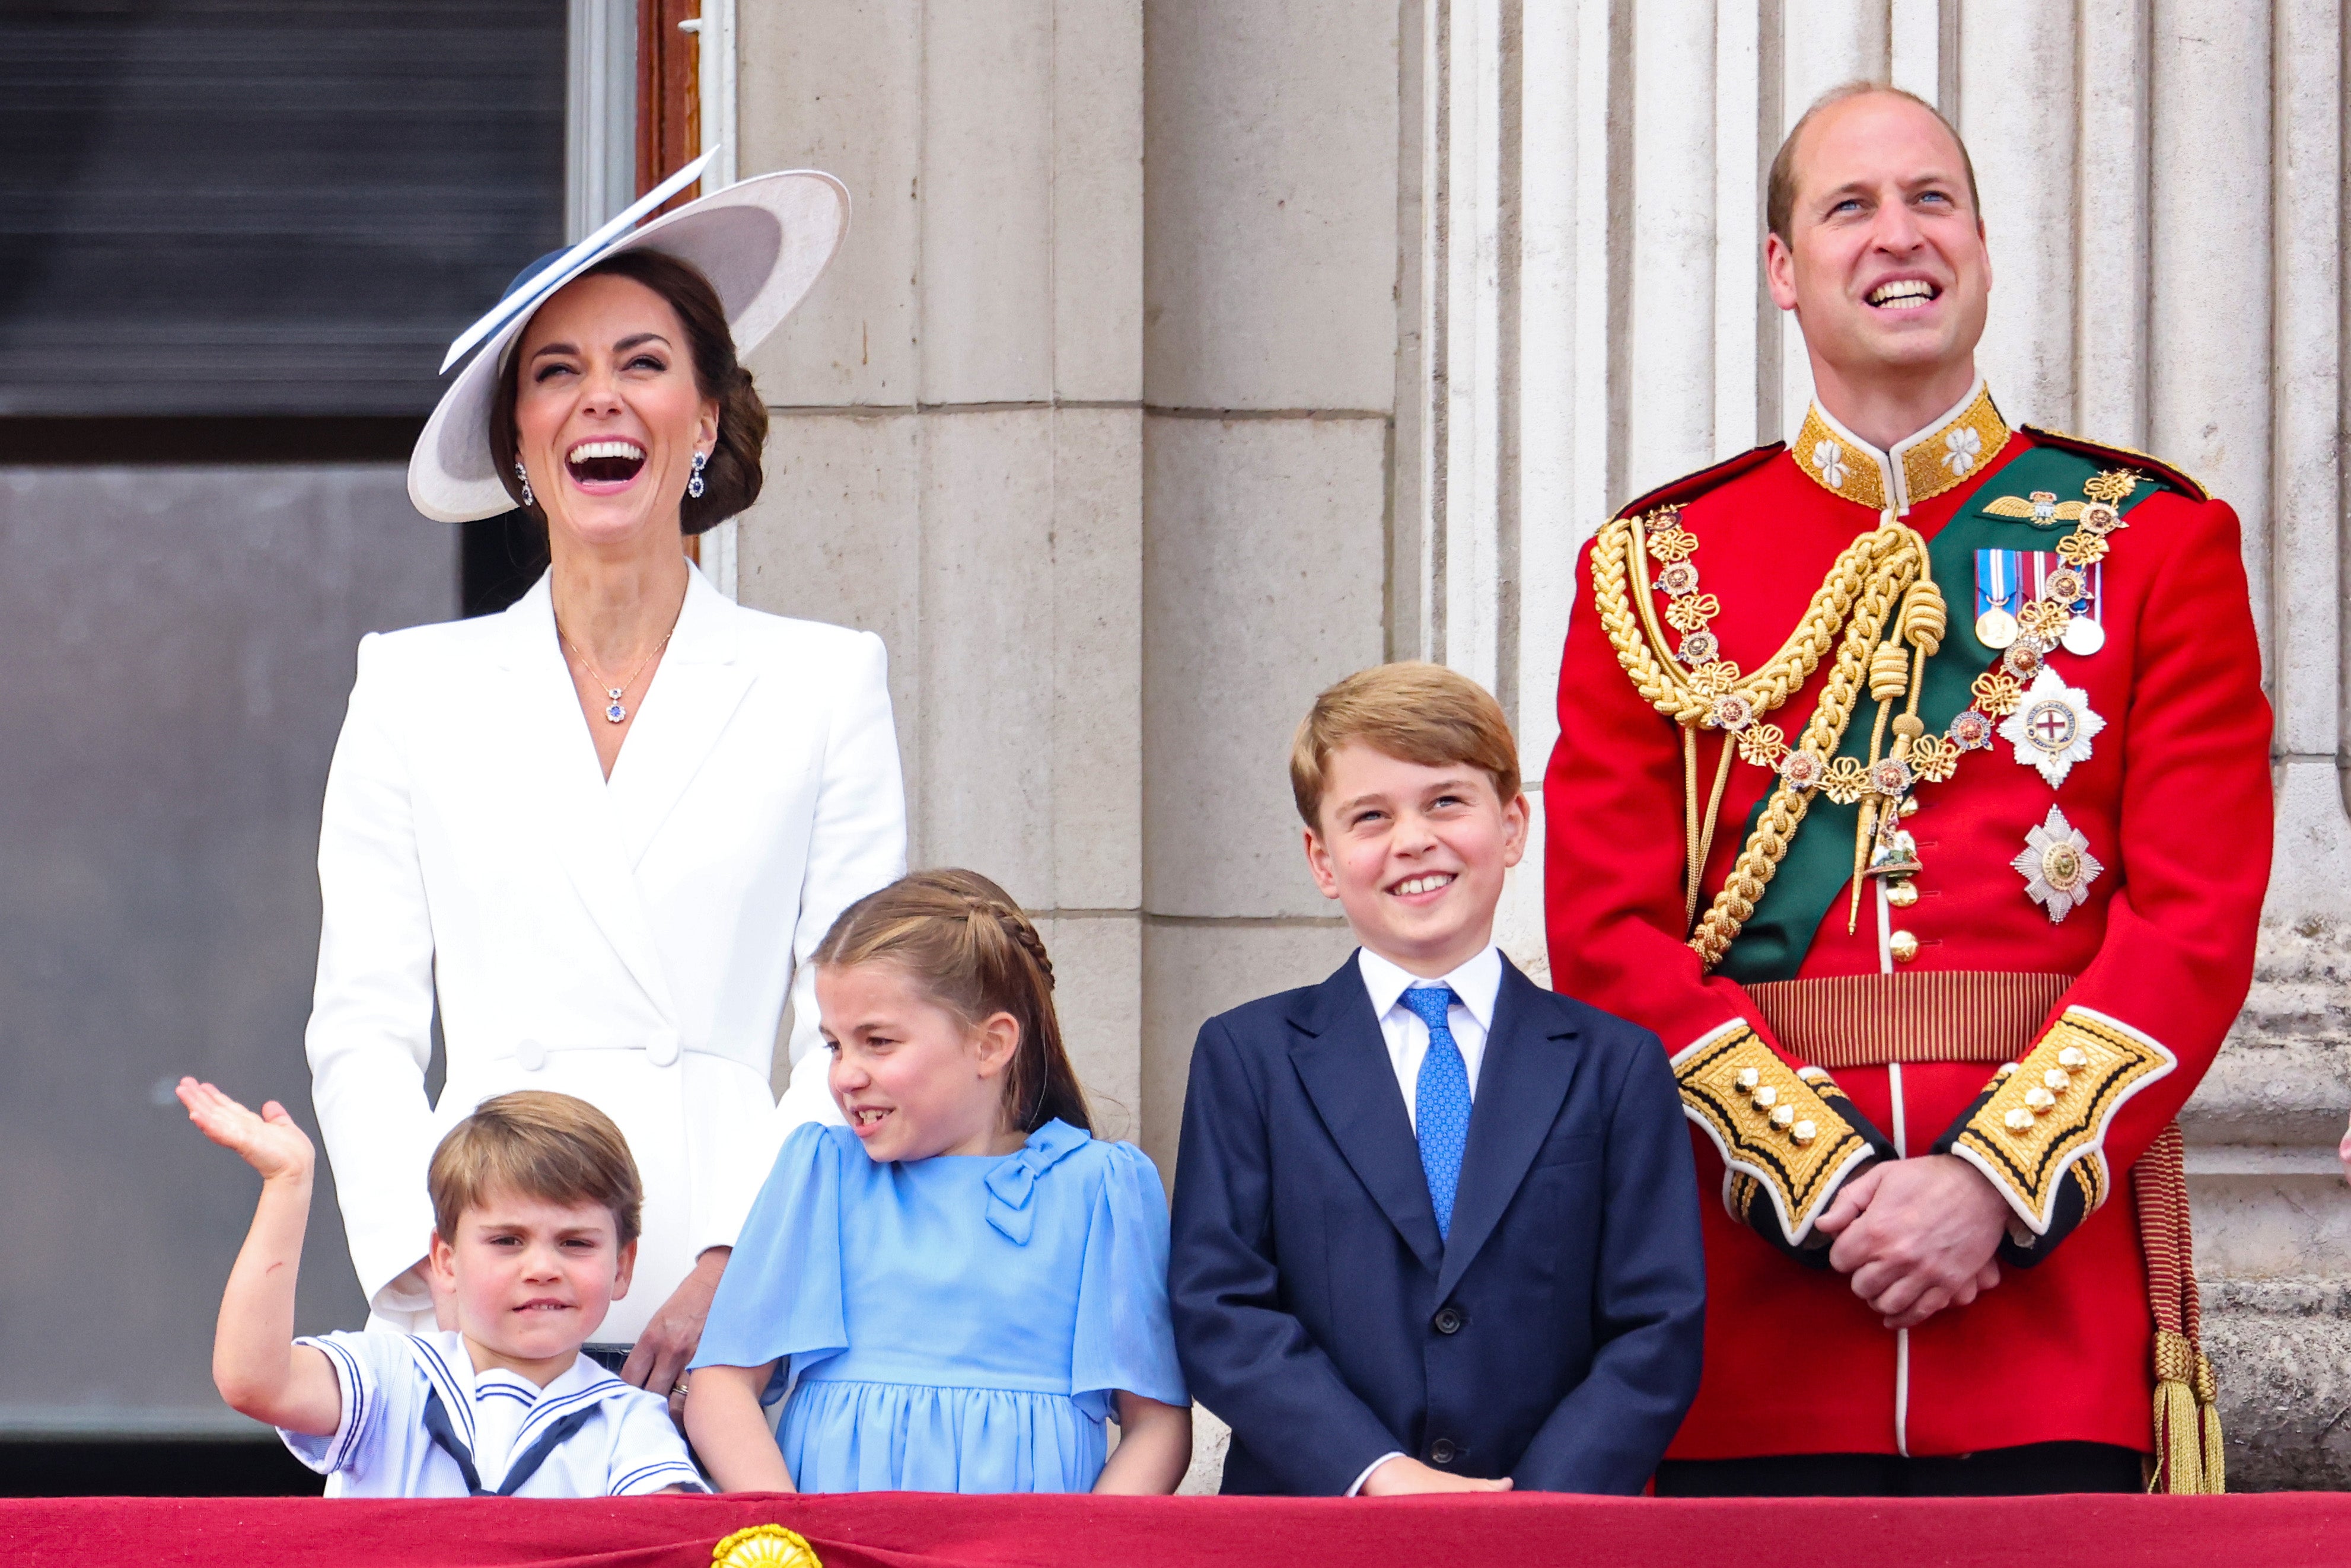 Prince William and his three children, George, Charlotte and Louis, are next in line for the throne